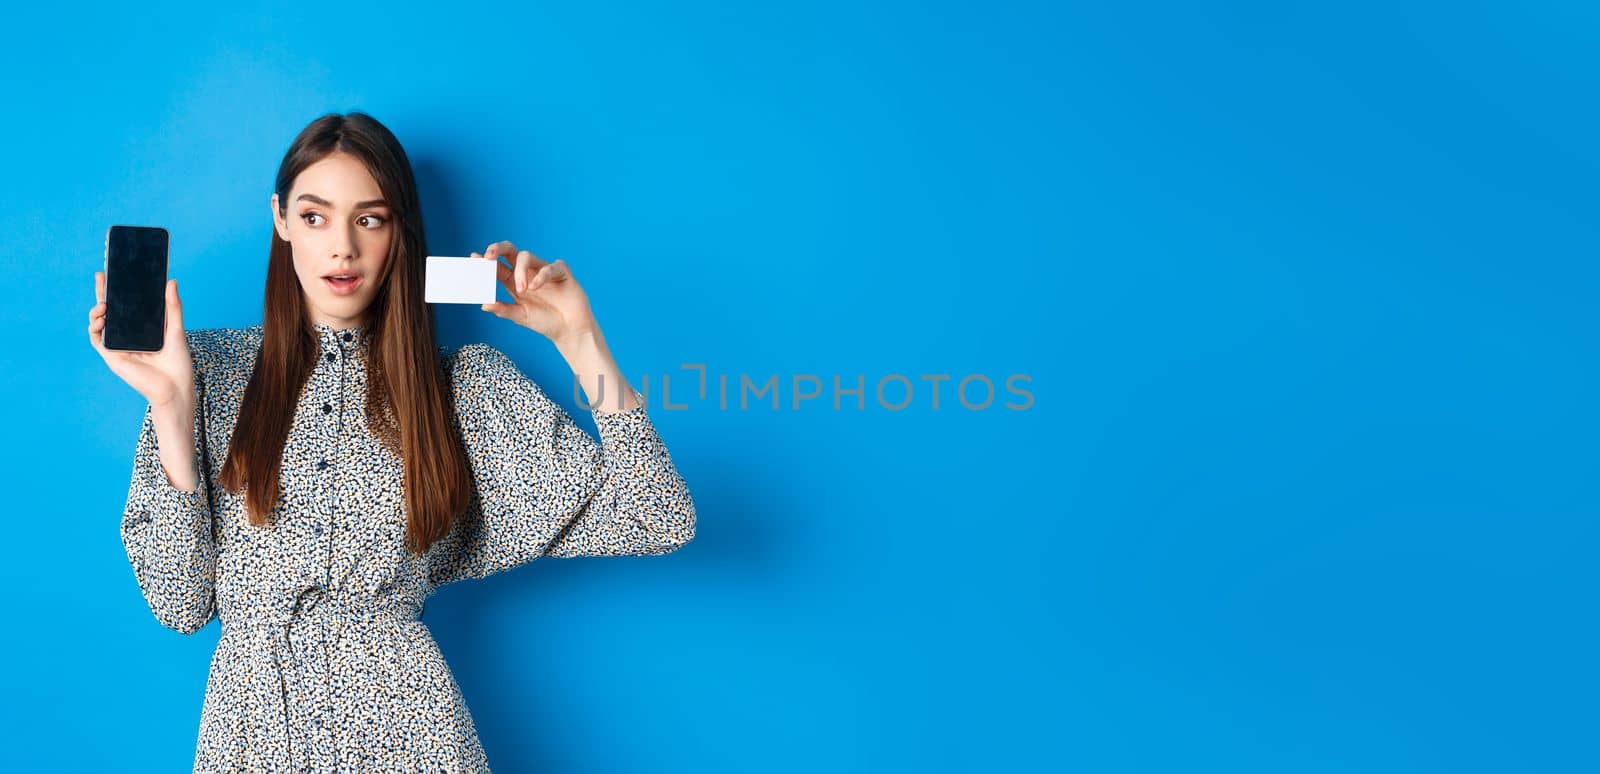 Online shopping. Pensive lady in dress showing empty phone screen and plastic credit card, order in internet, blue background.